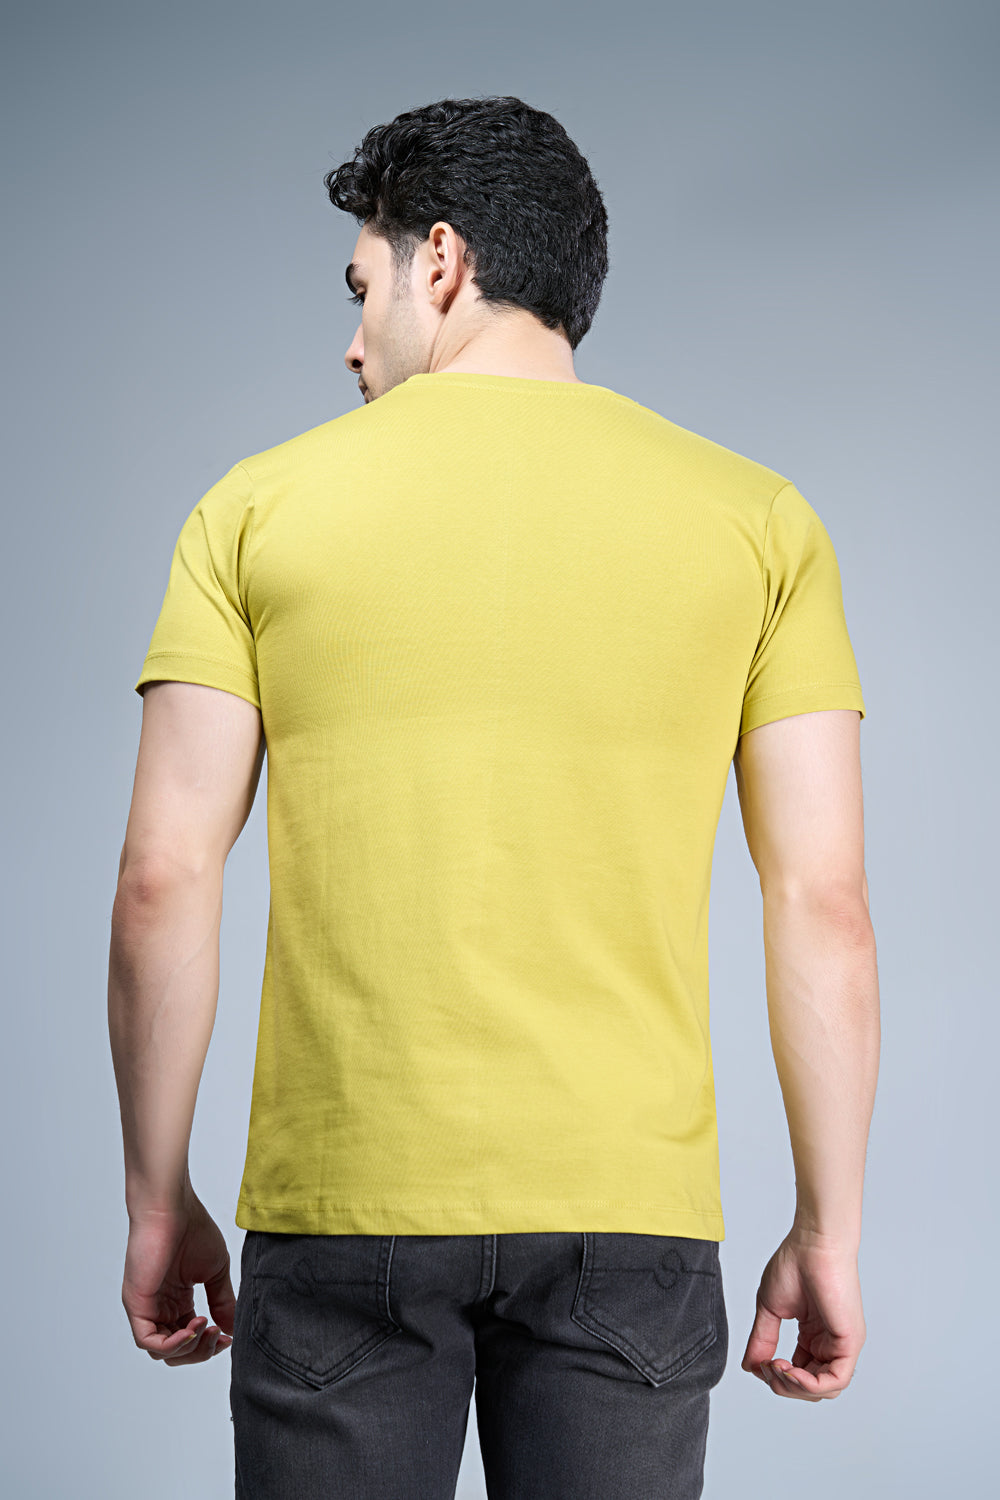 B. Yellow colored, cotton Graphic T shirt for men, half sleeves and round neck, back view.